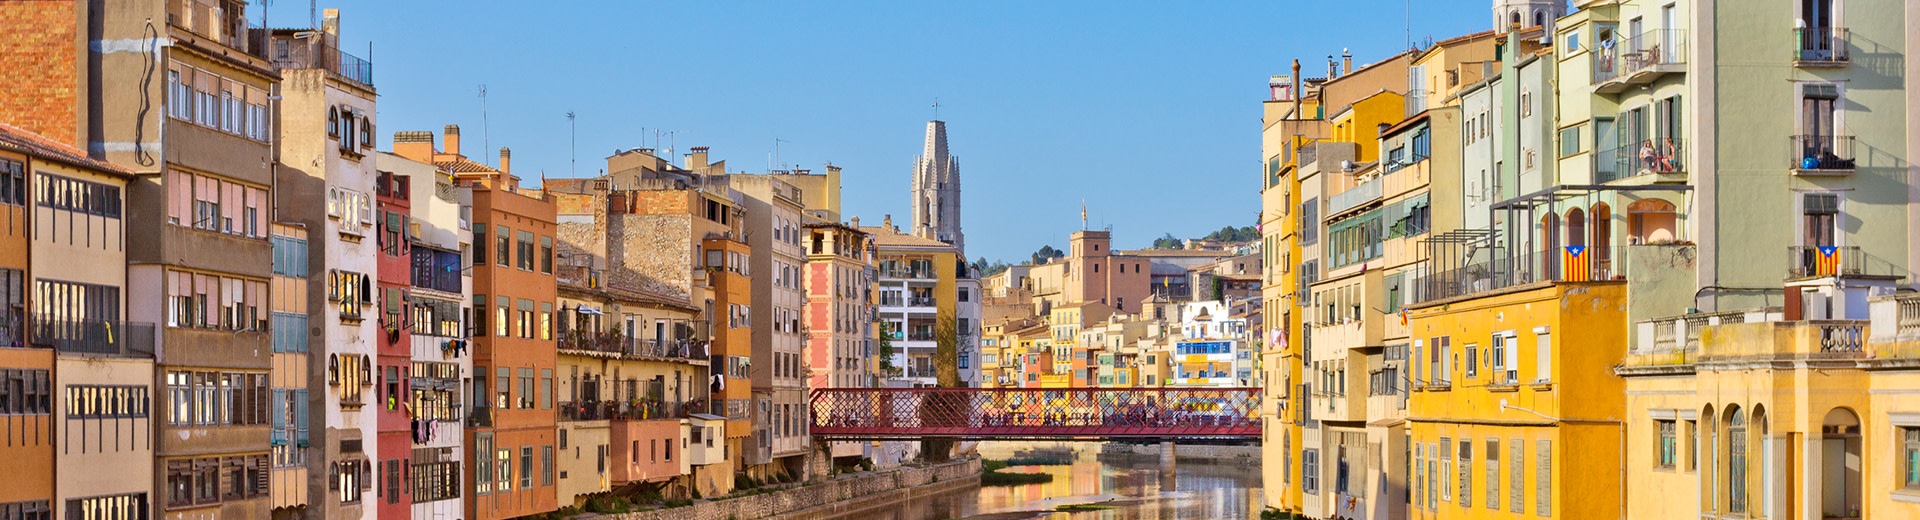 The beautiful bright colours of Girona on a clear and sunny day, overlooks a canal or waterway.